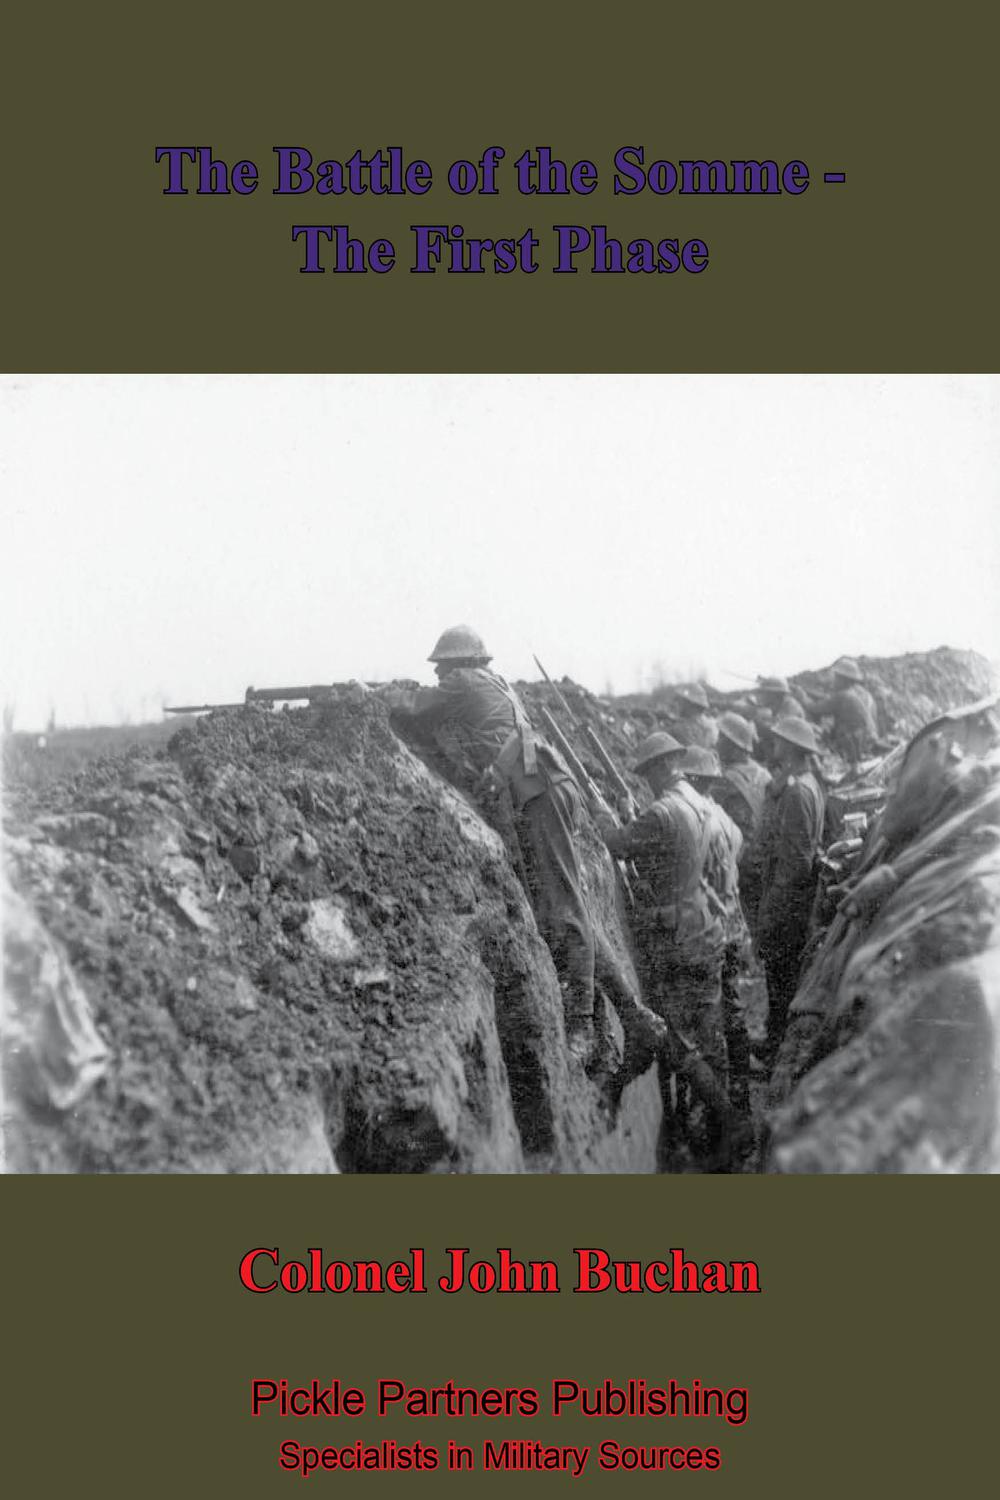 The Battle Of The Somme - The First Phase. [Illustrated Edition] - Colonel John Buchan,,